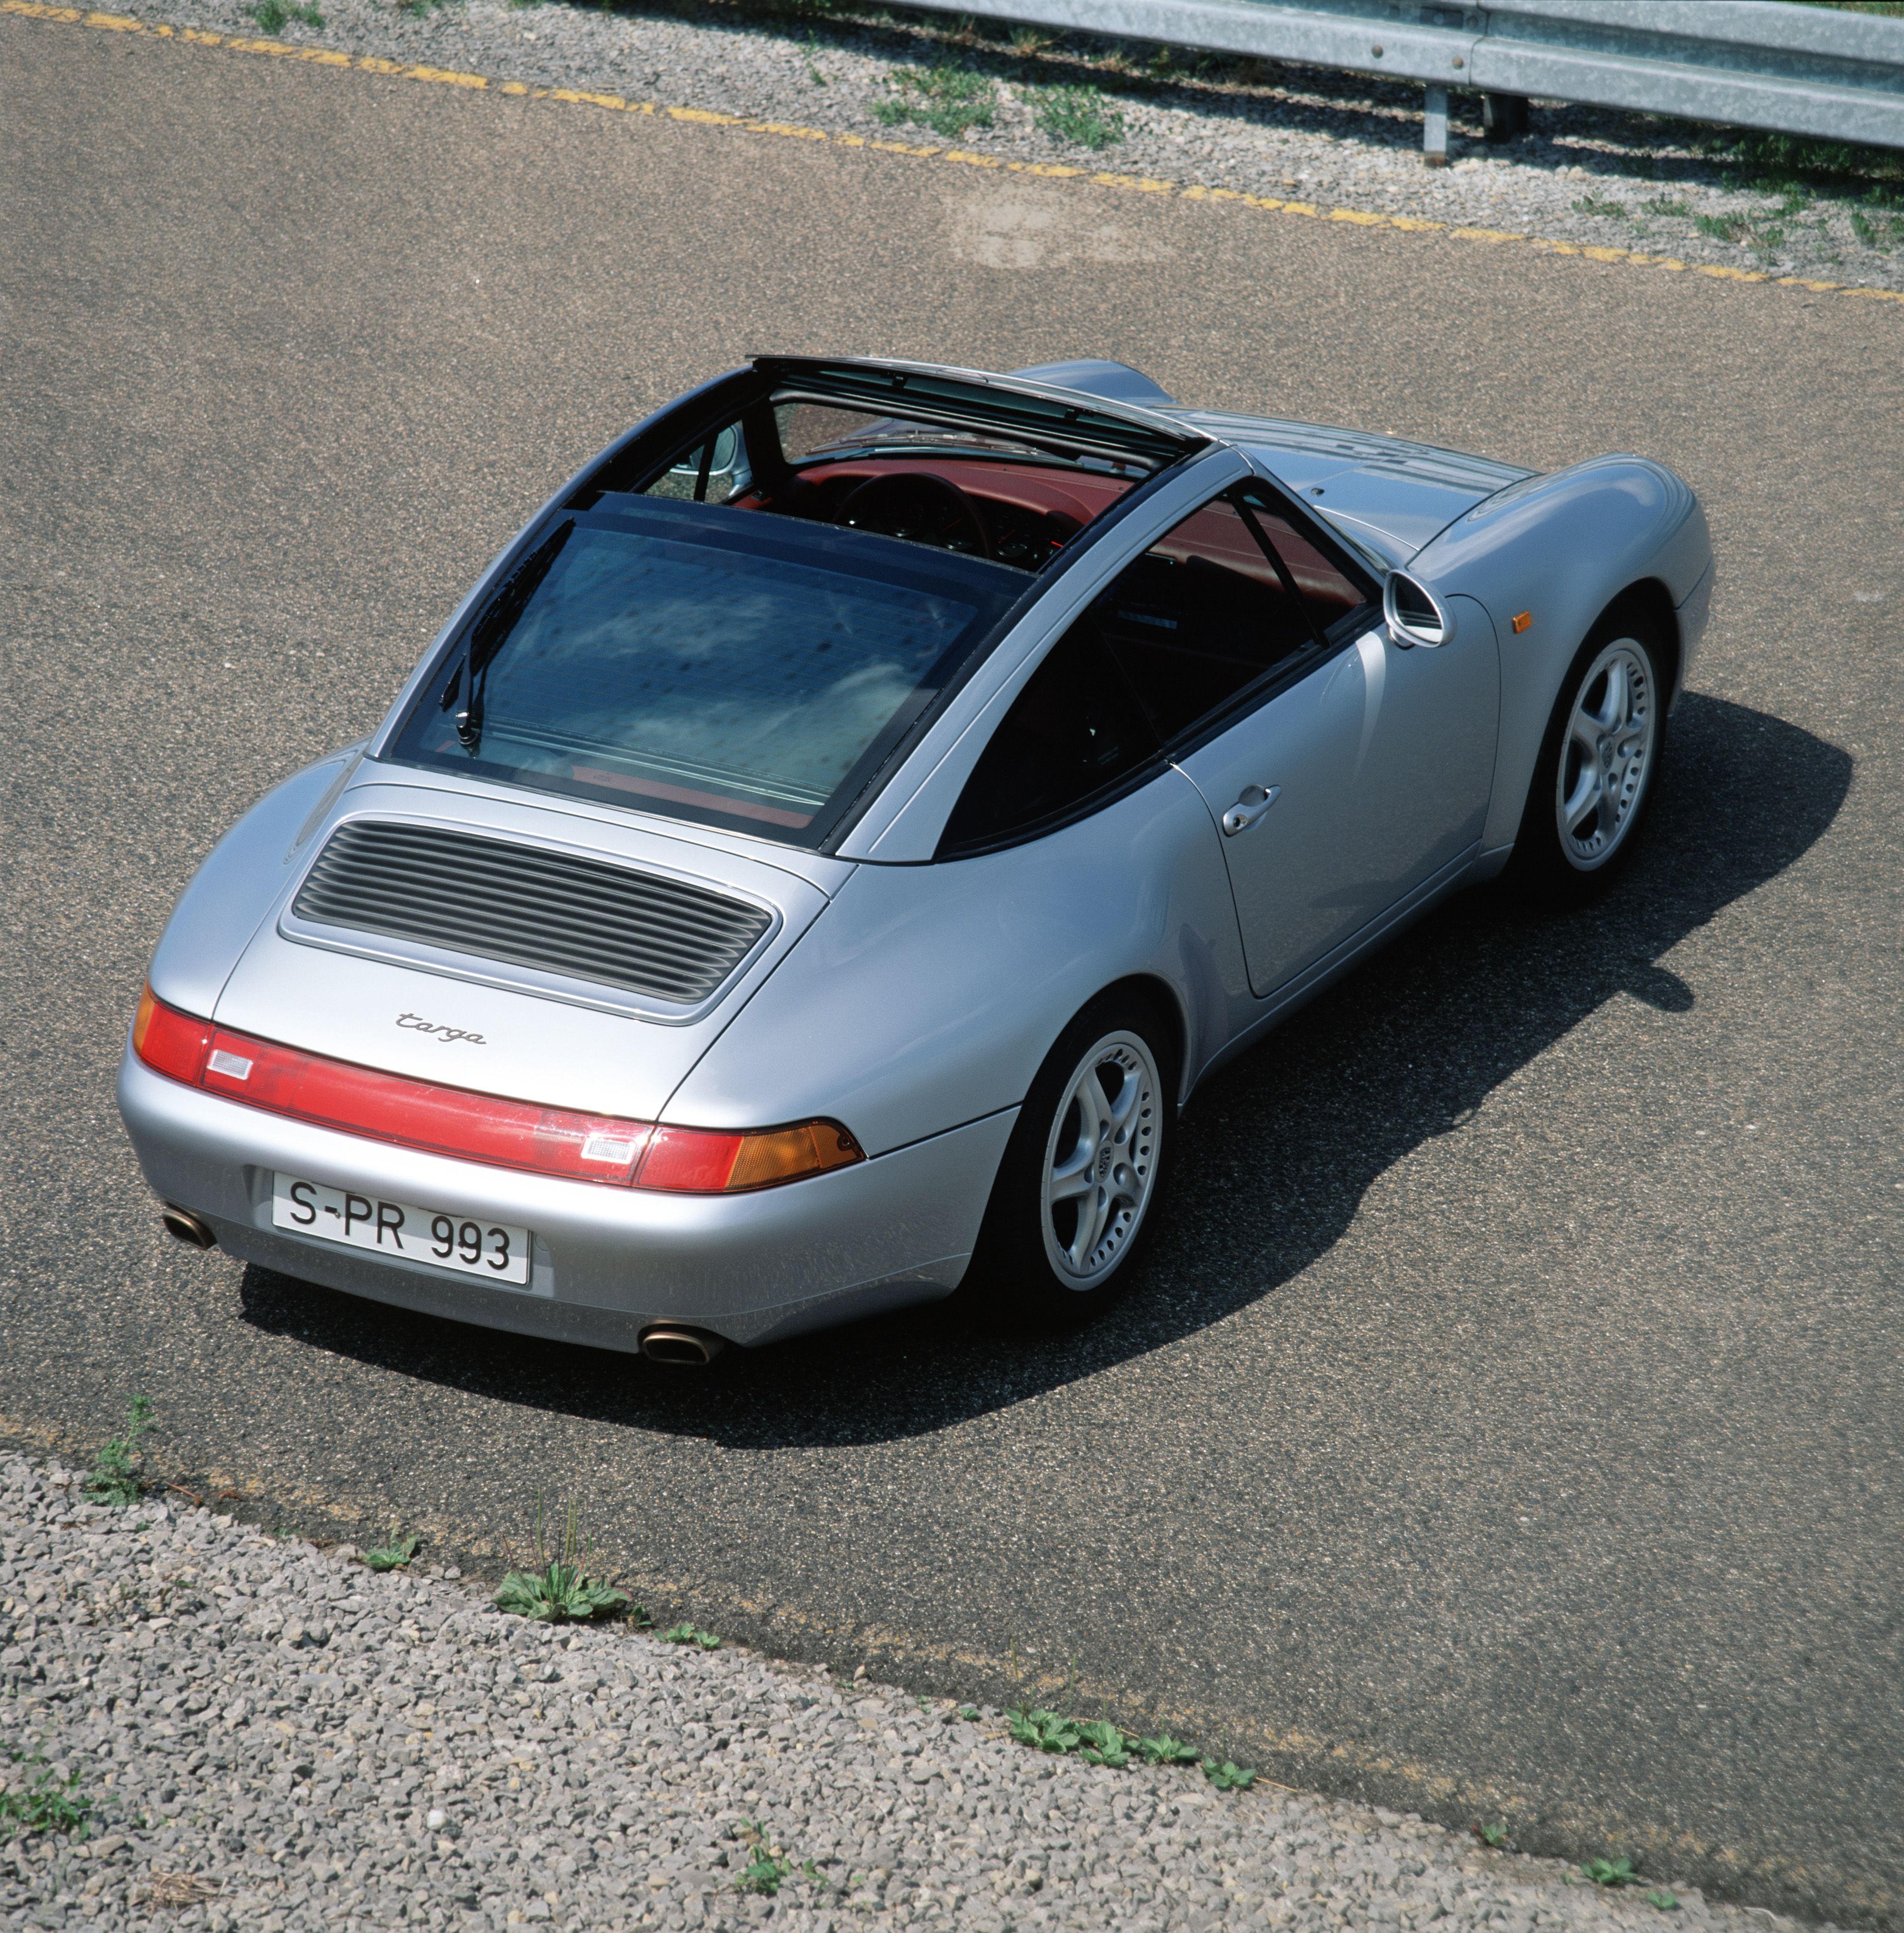 Weissach conceived a radically different Targa concept on the 993 platform using a large glass panel that retracted inside the rear window. Zuffenhausen assemblers mounted the glass roof structure onto a cabriolet platform. Porsche Archiv